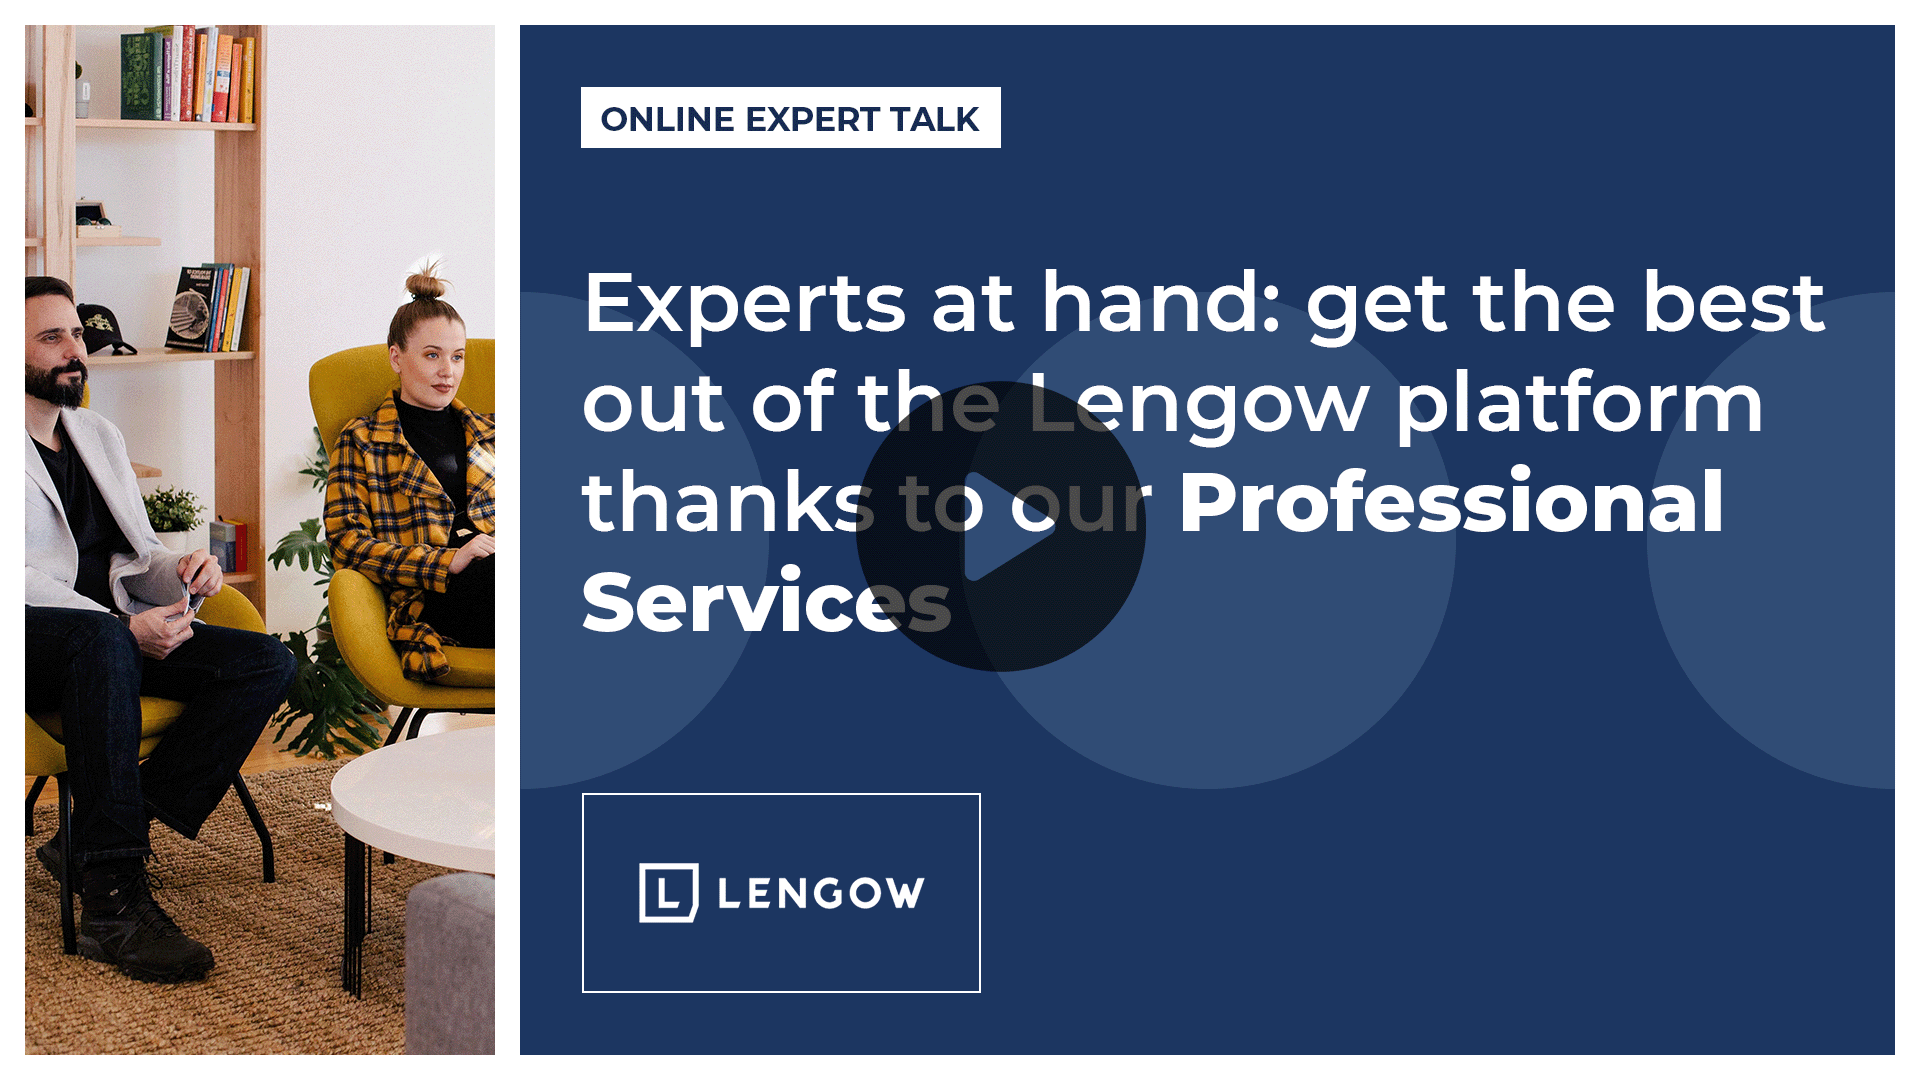 Professional Services at Lengow